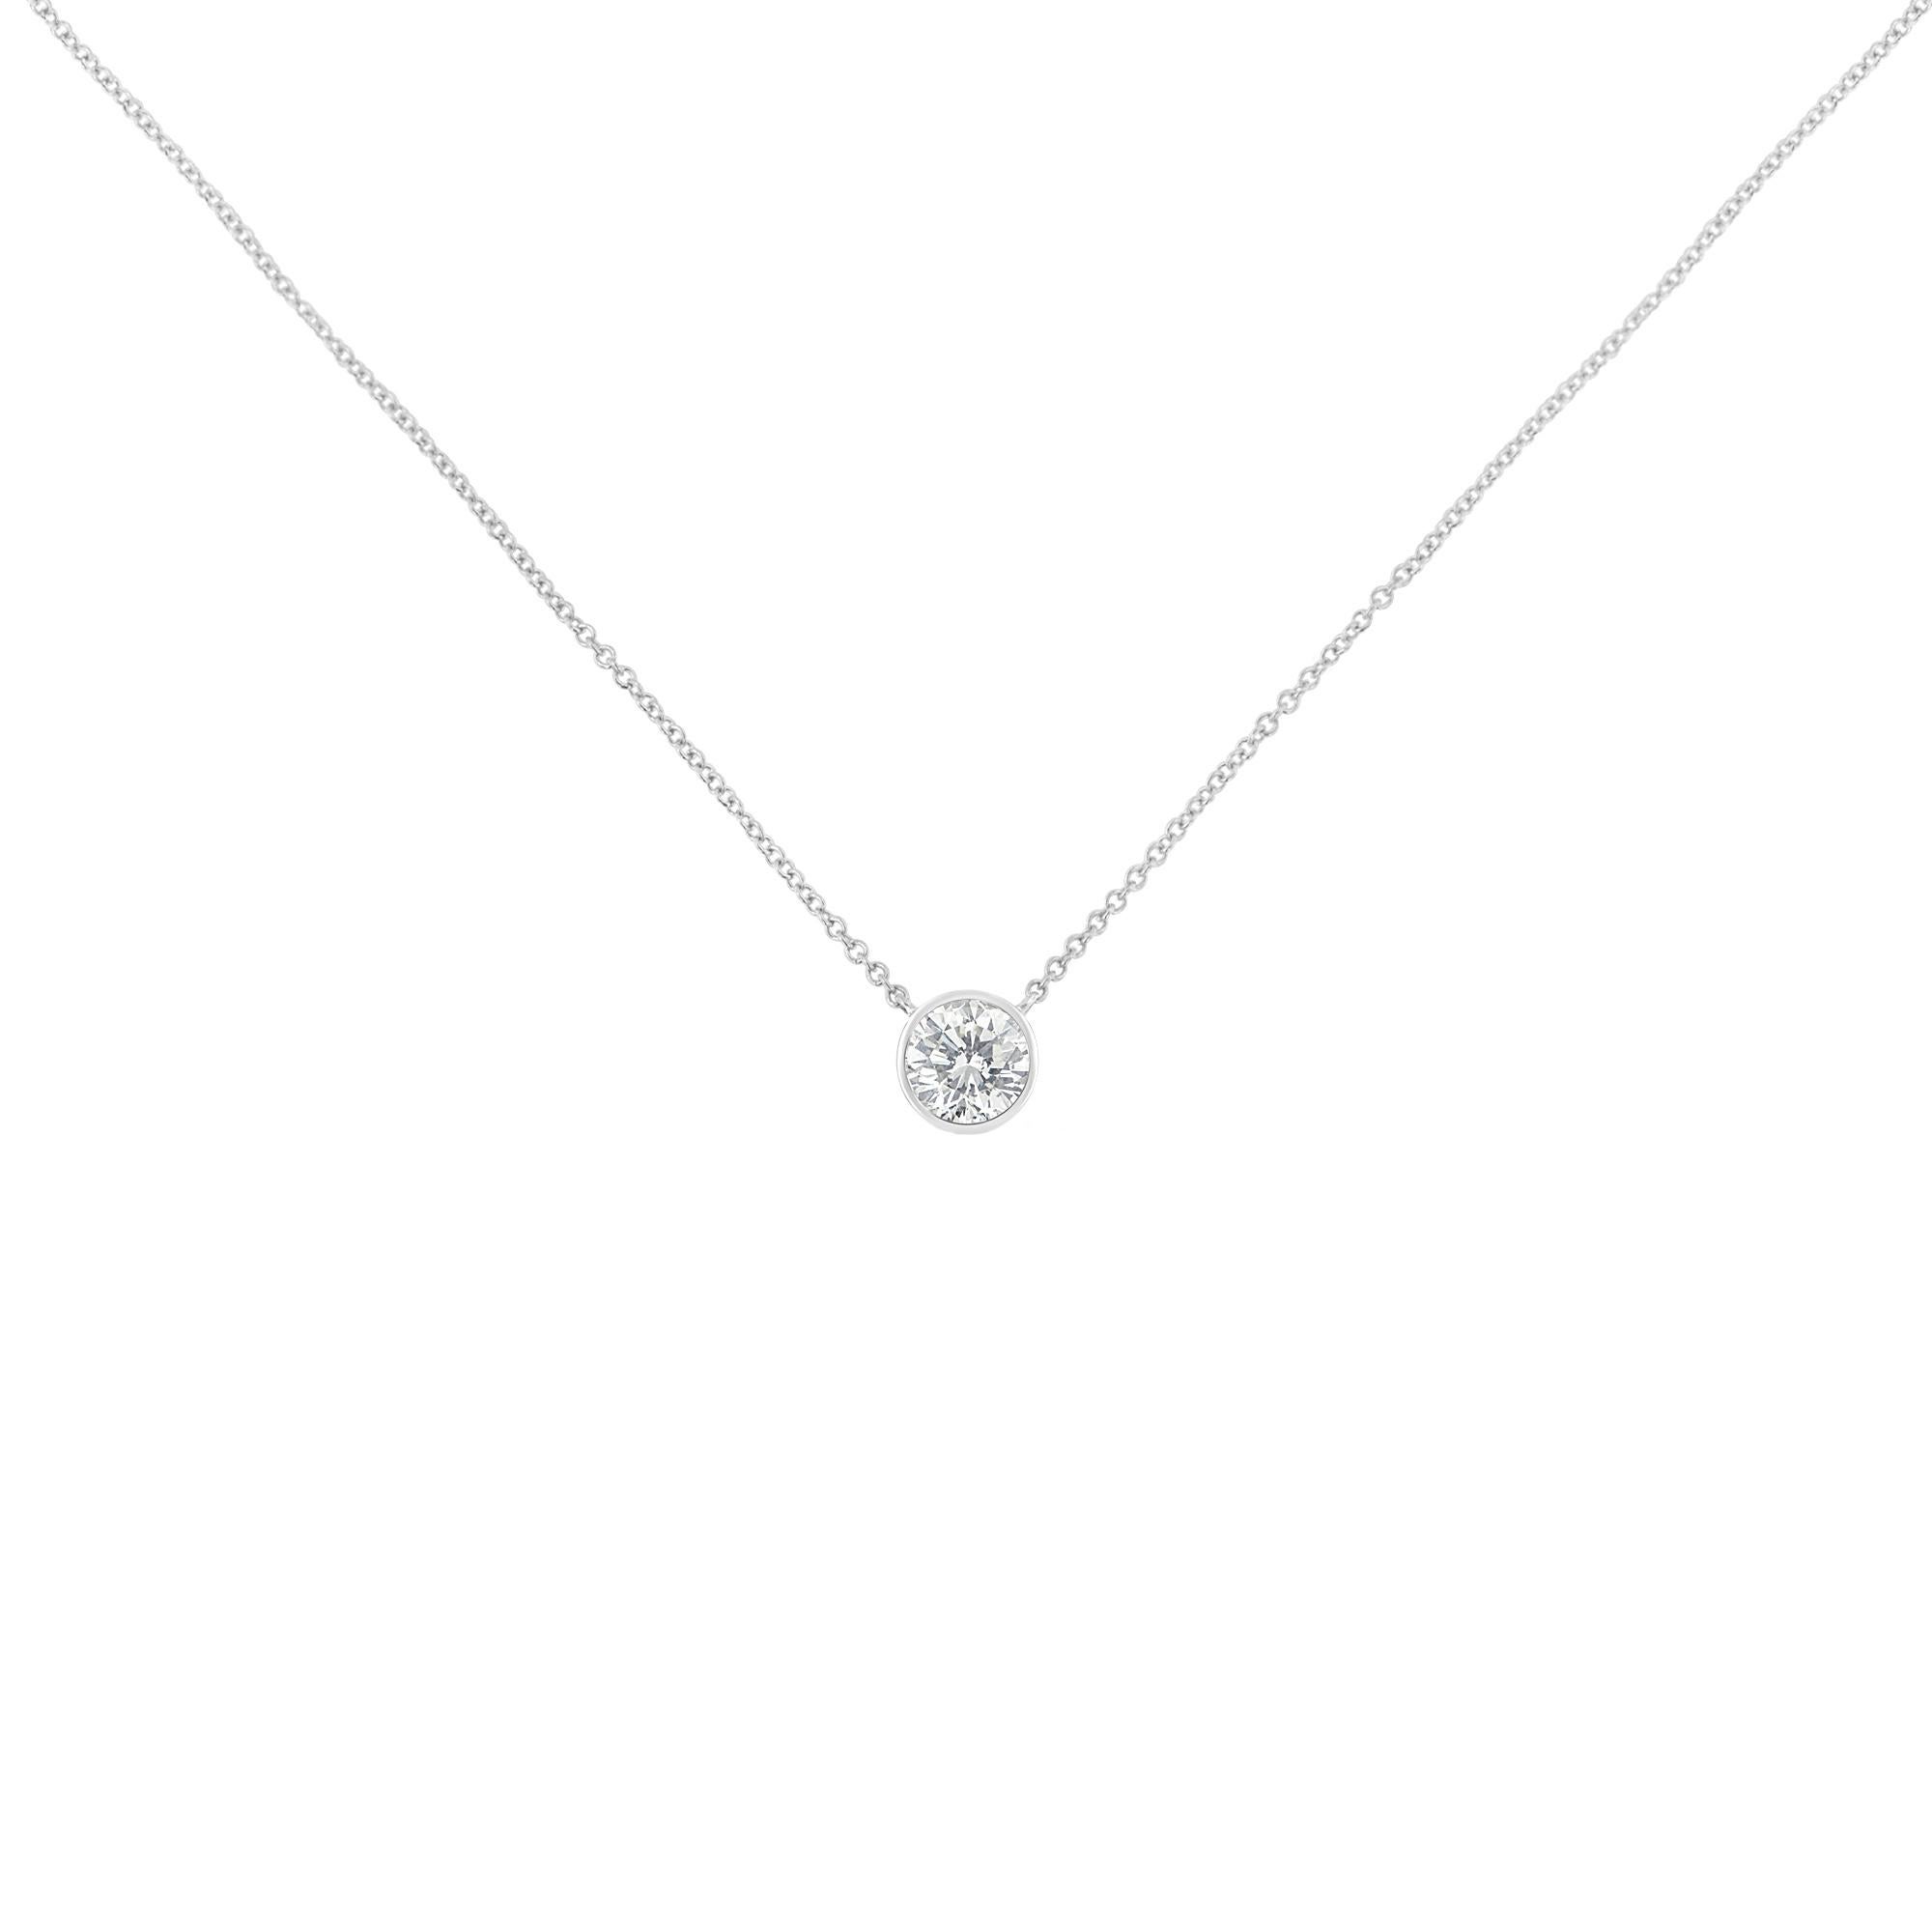 Some things shouldn't be reinvented, which is why we created the solitaire diamond necklace. This understated yet dazzling diamond-forward piece the perfect way to highlight every big occasion, transition, and personal achievement in your life. This